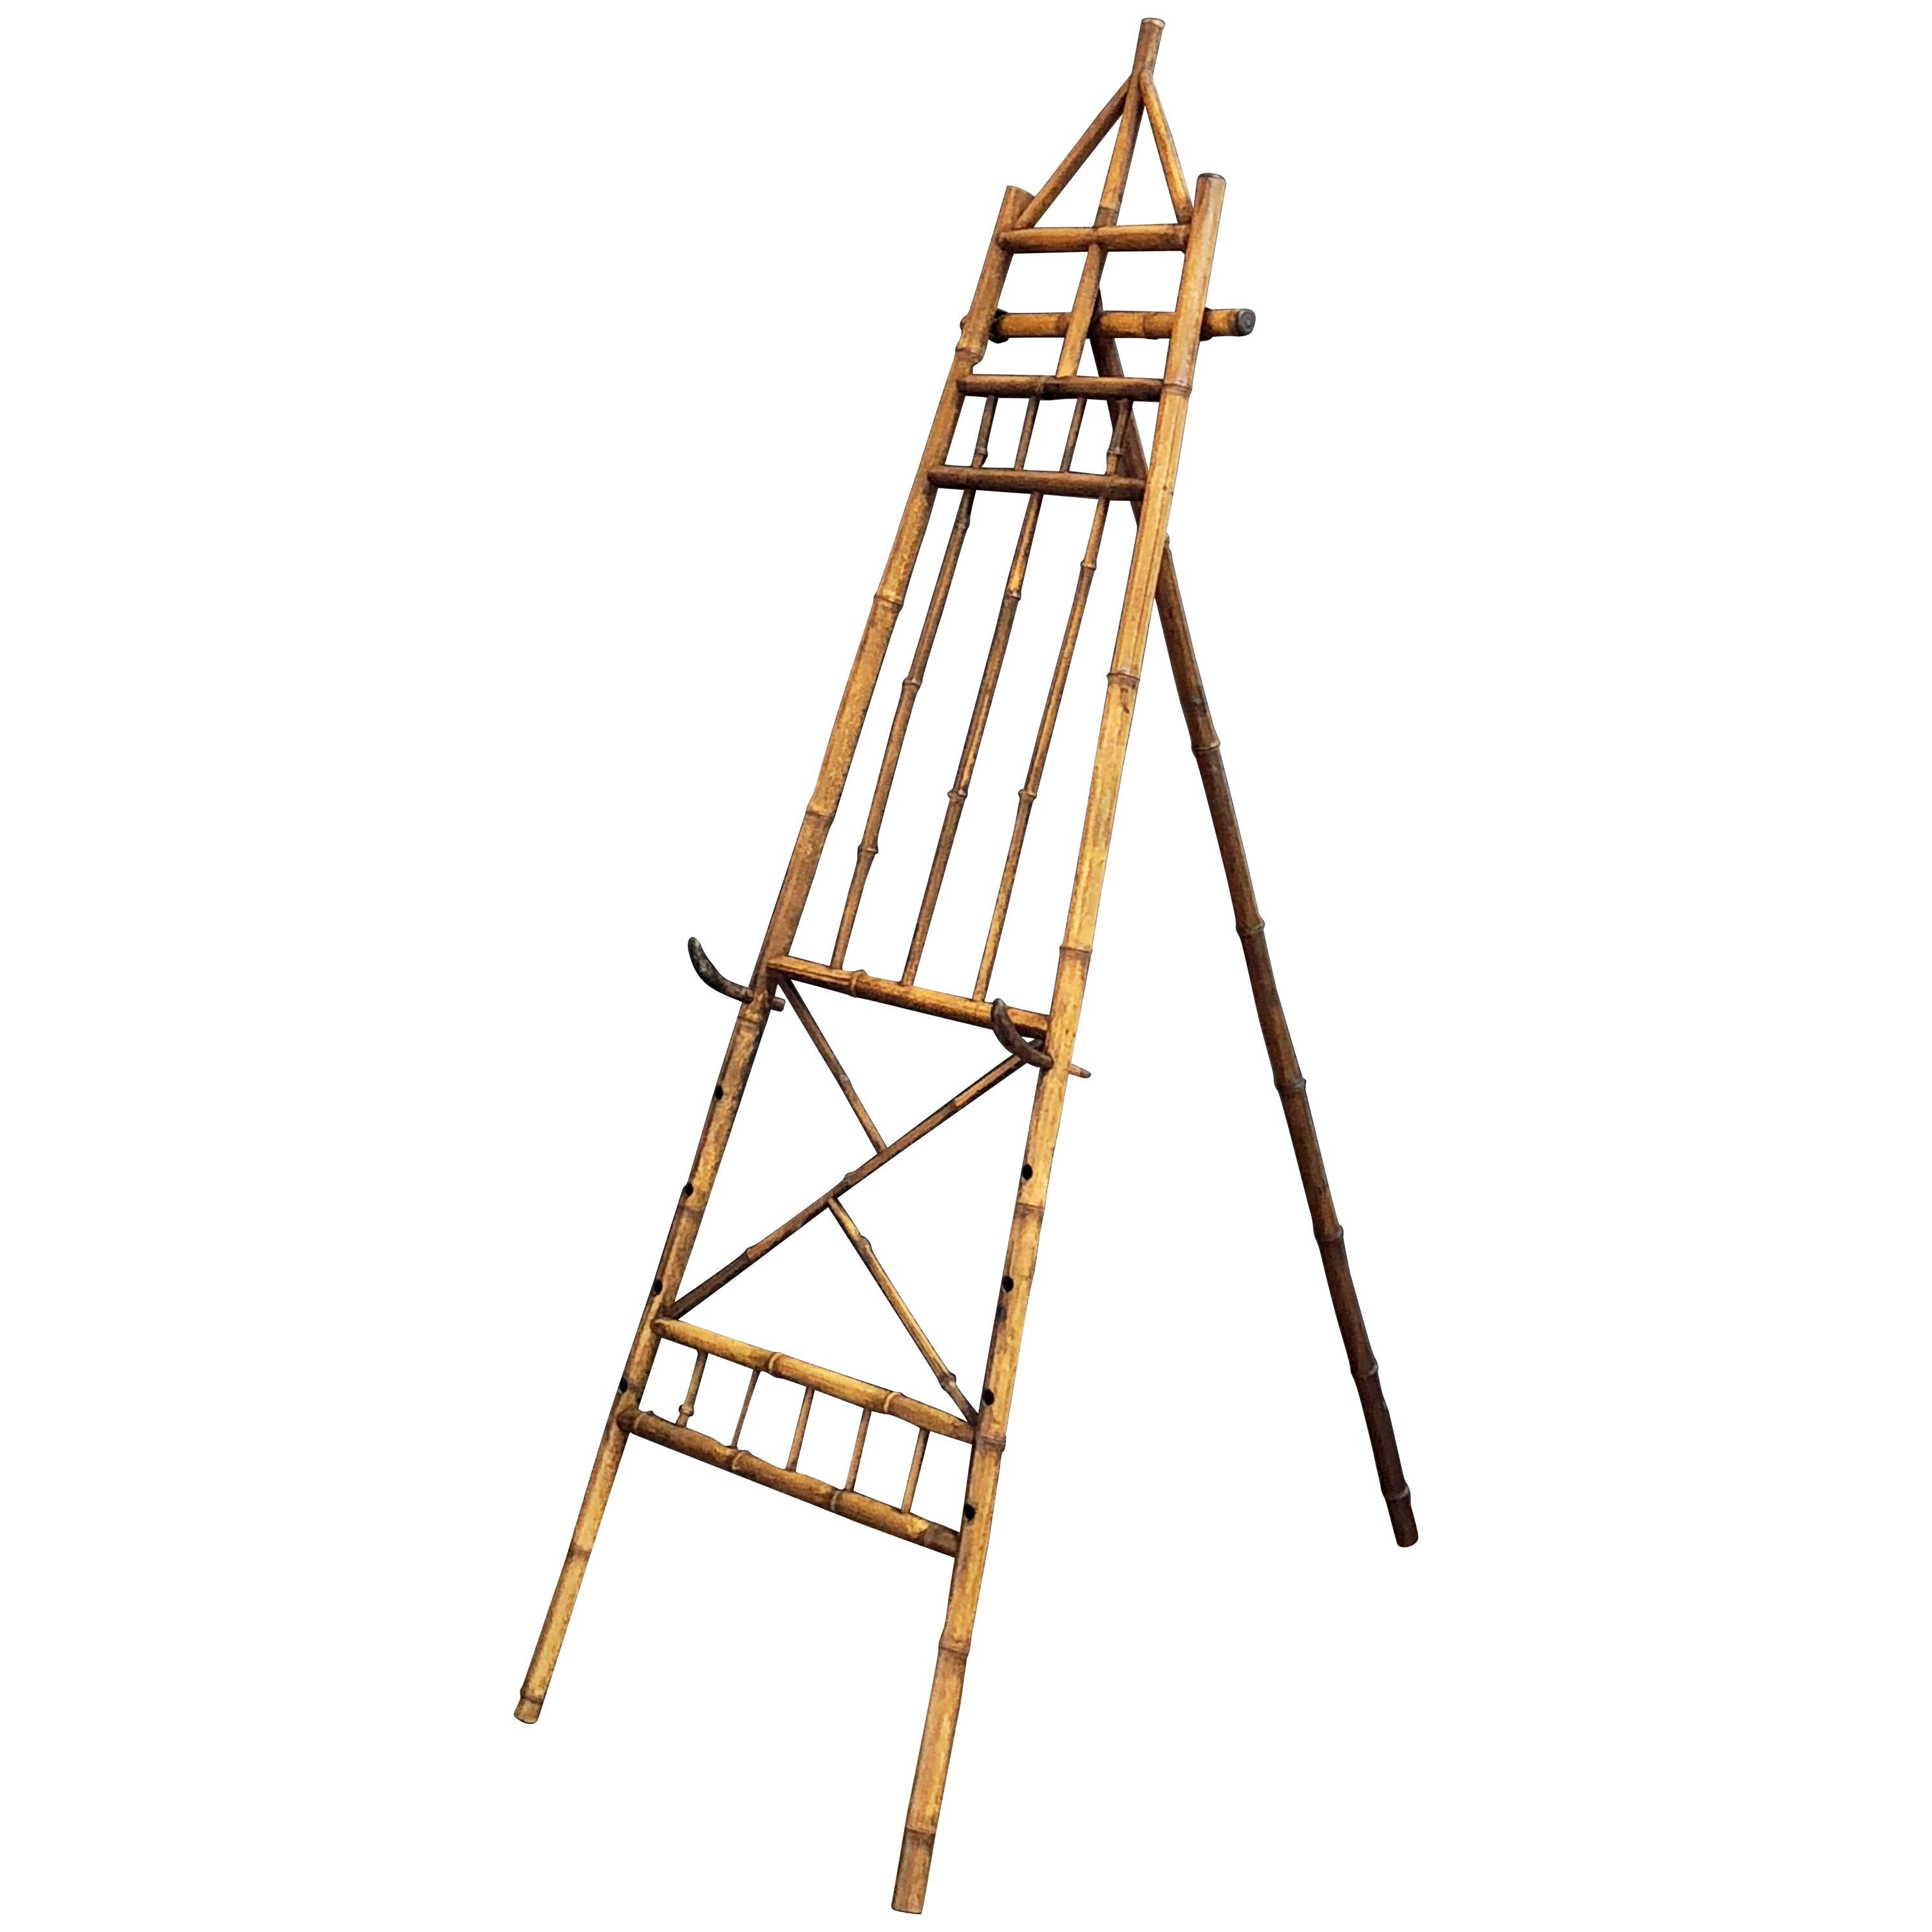 English Bamboo Display Easel from the Aesthetic Movement Period